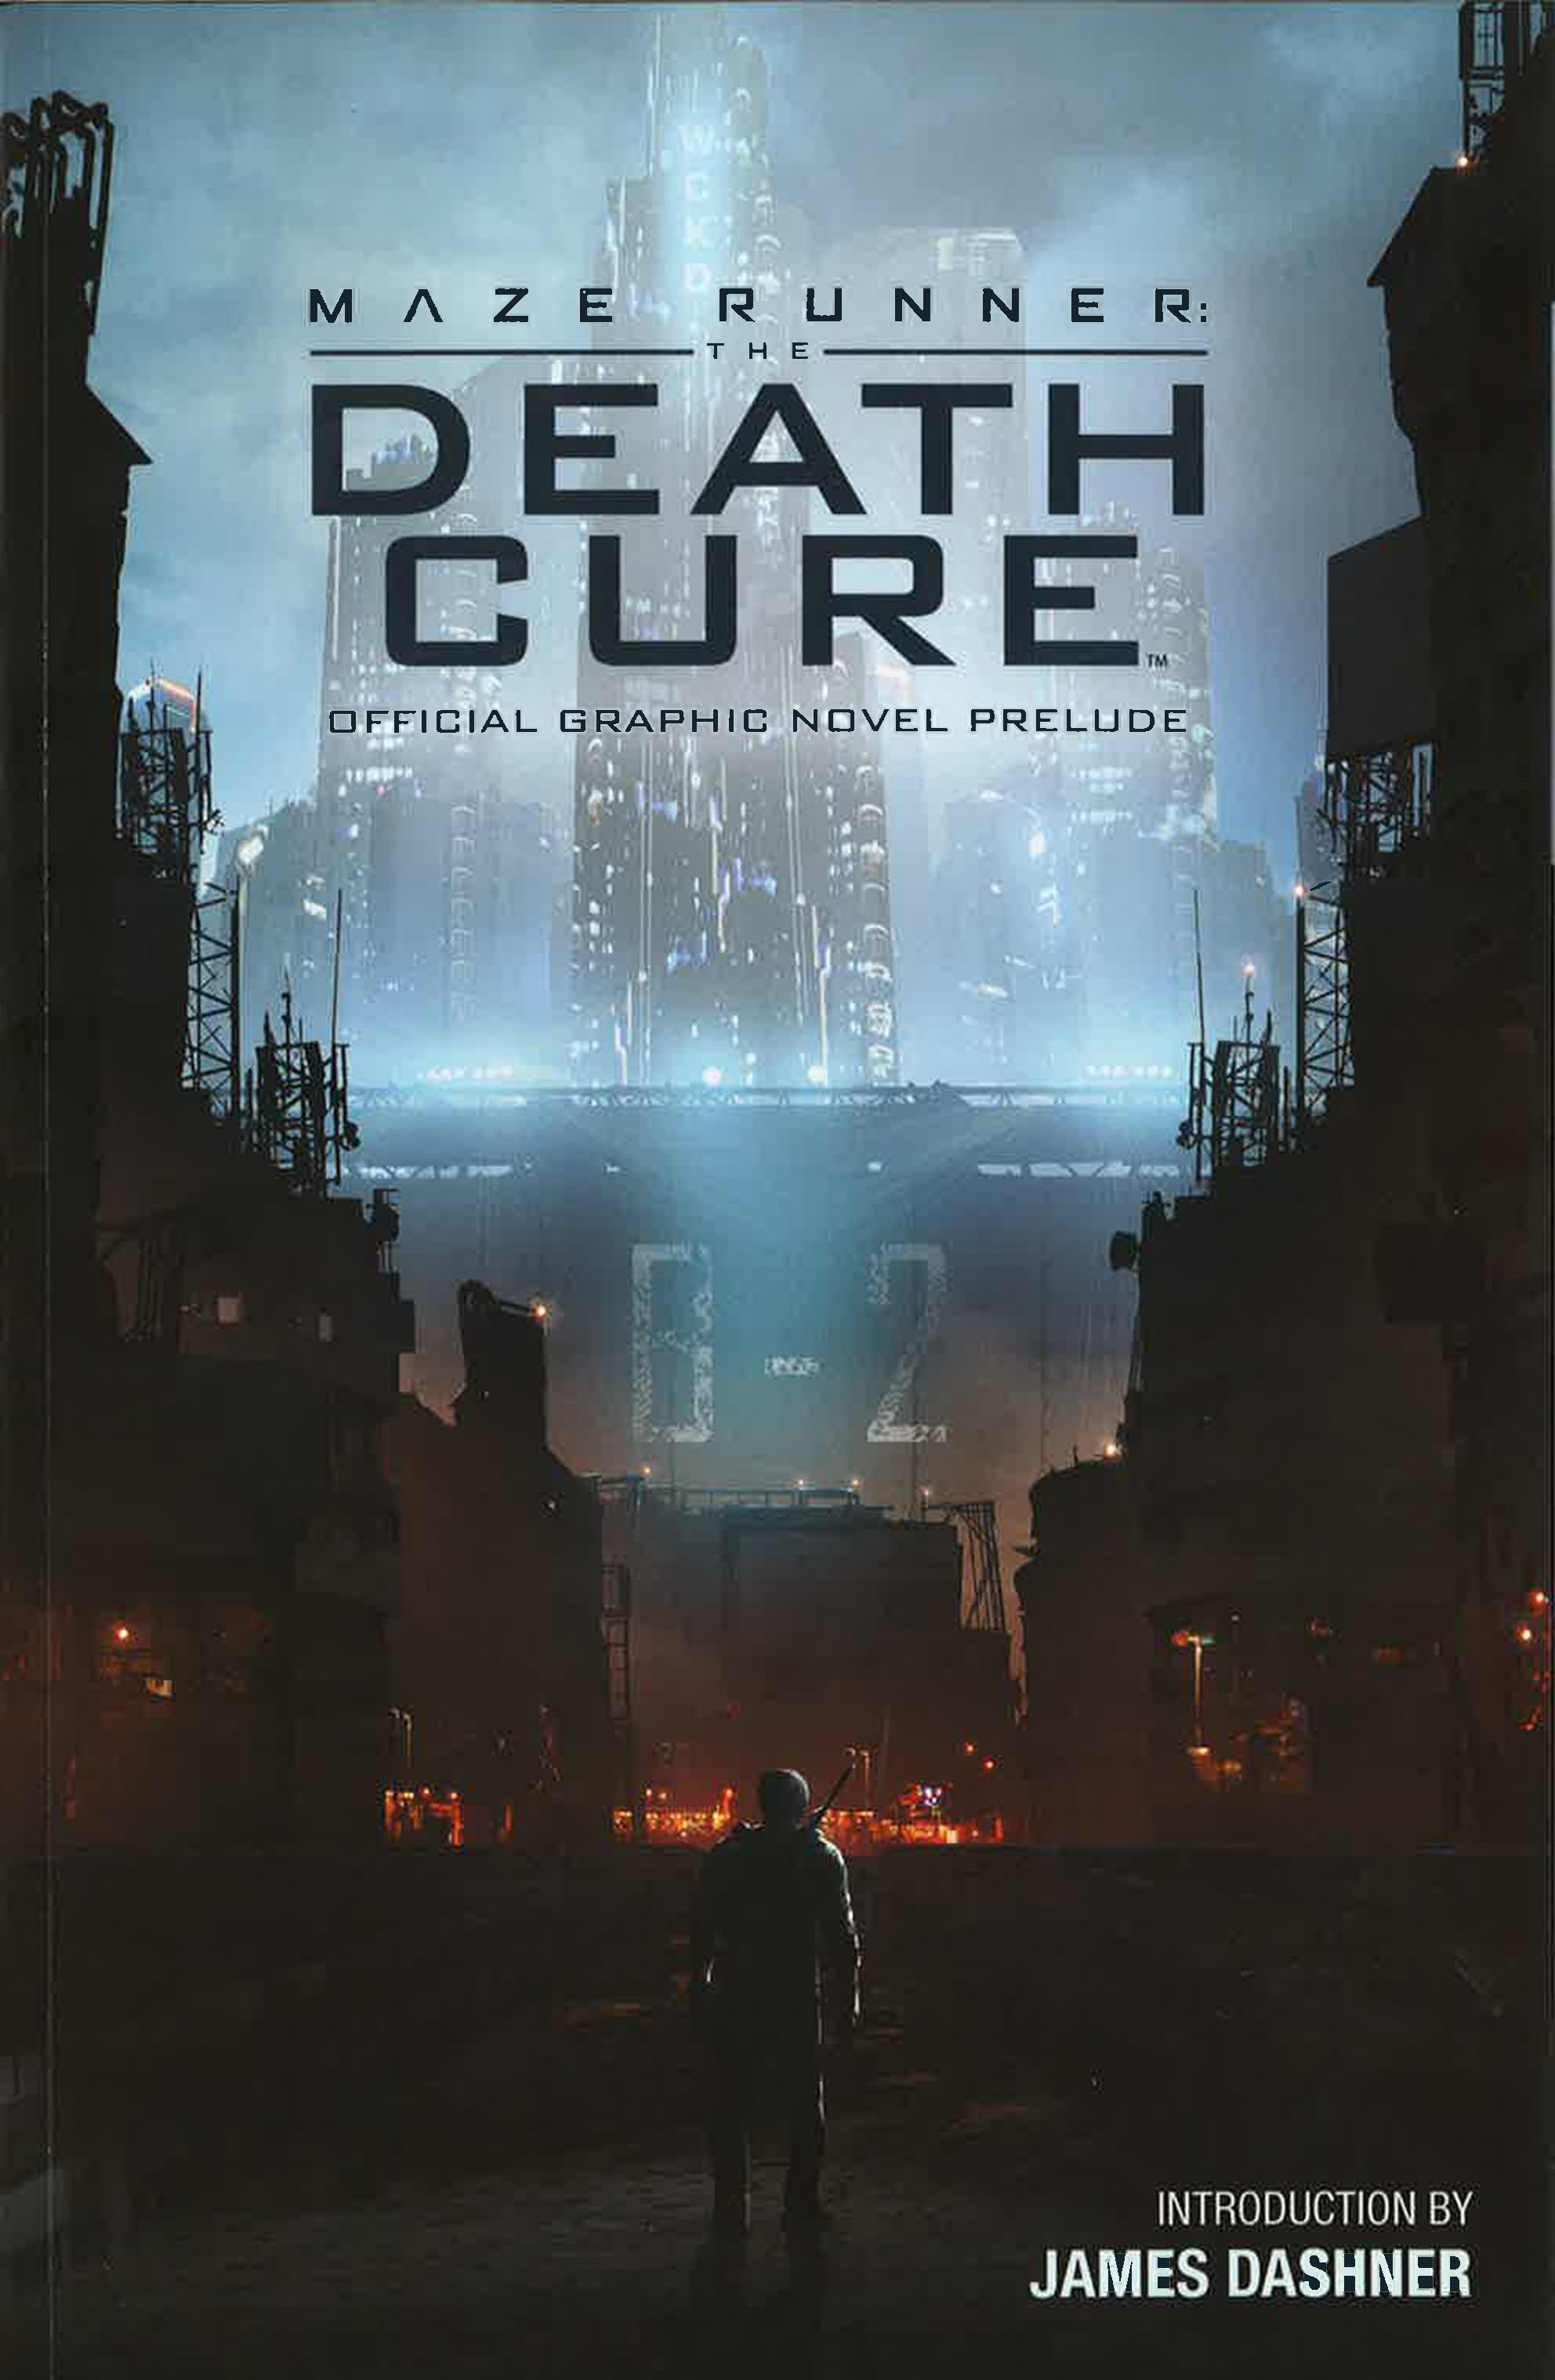 maze runner: the death cure online free